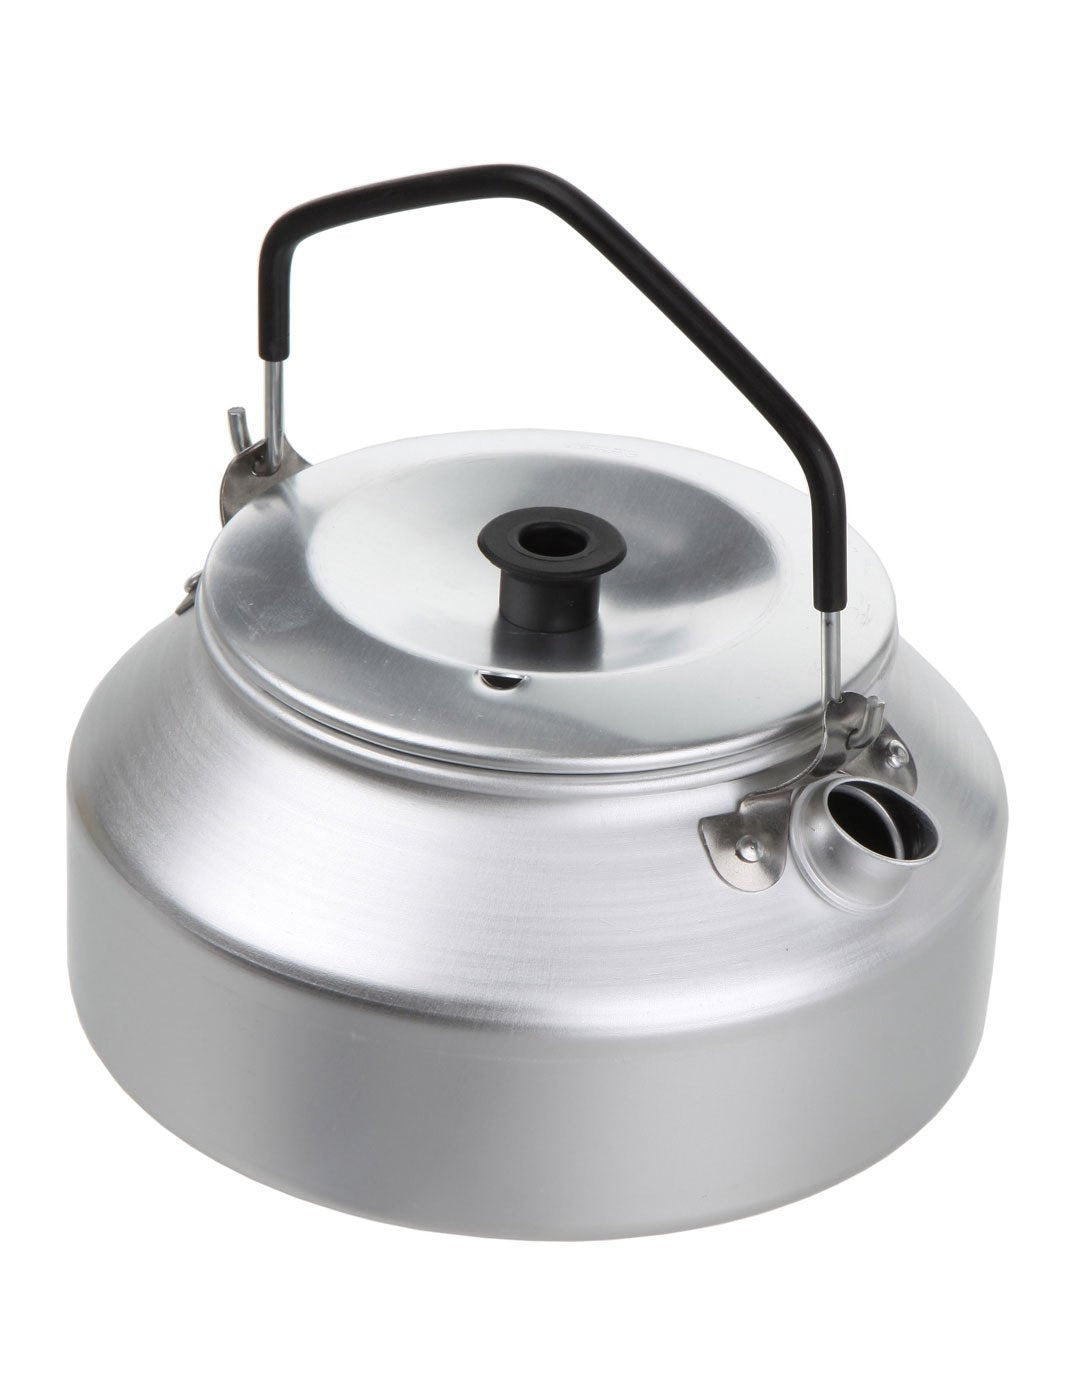 Trangia 27 2 UL Cooker with Kettle  Simply Hike UK